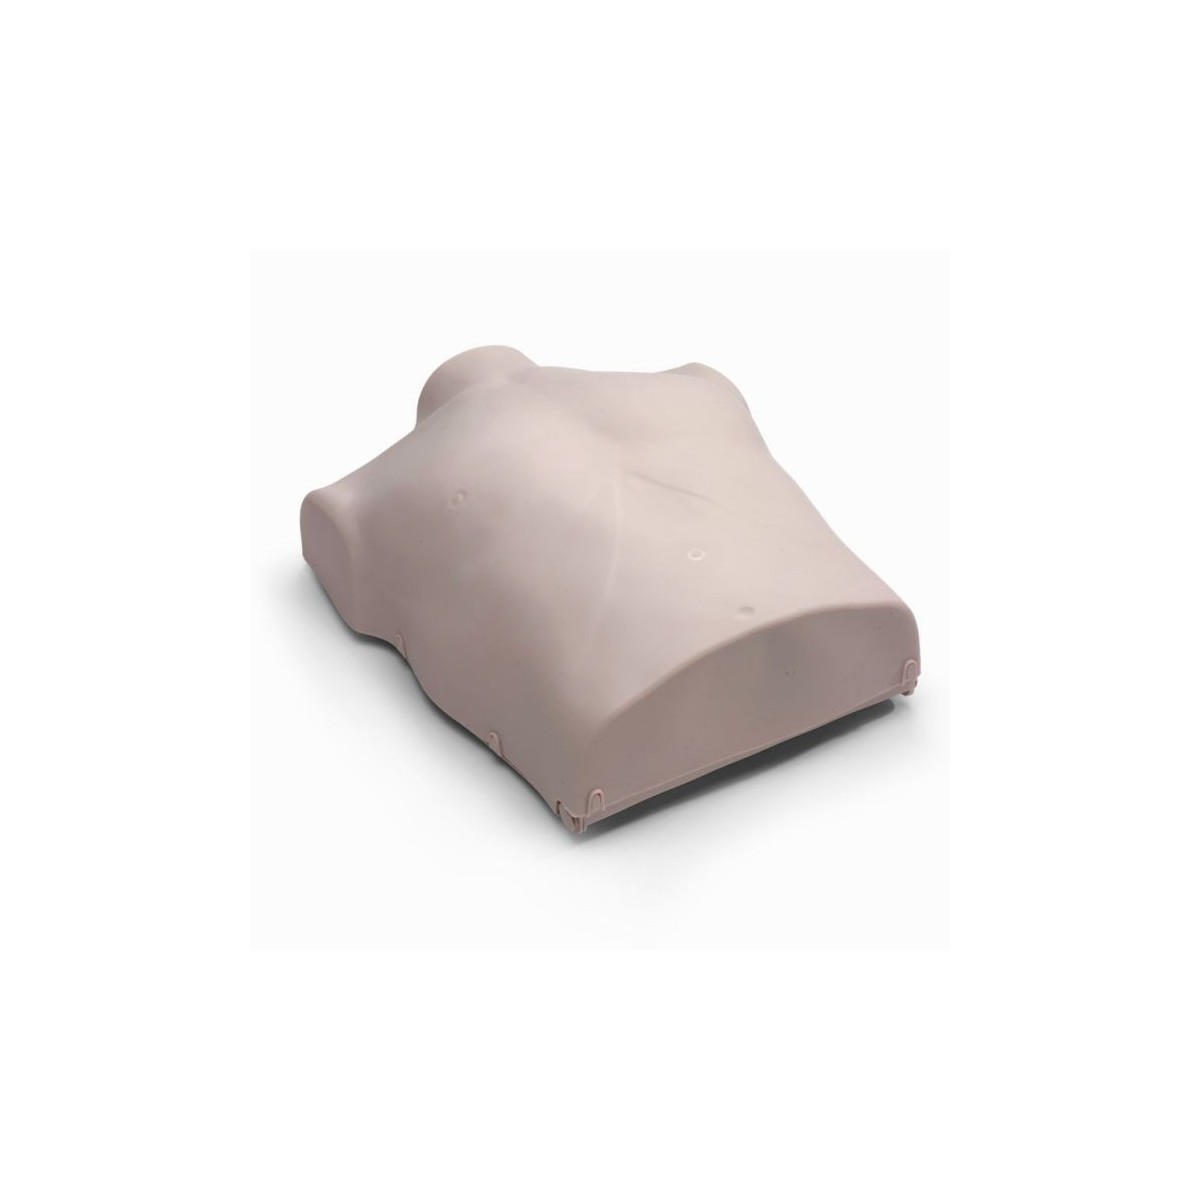 PRESTAN Torso Assembly with Monitor for the Professional Adult Medium Skin Manikin